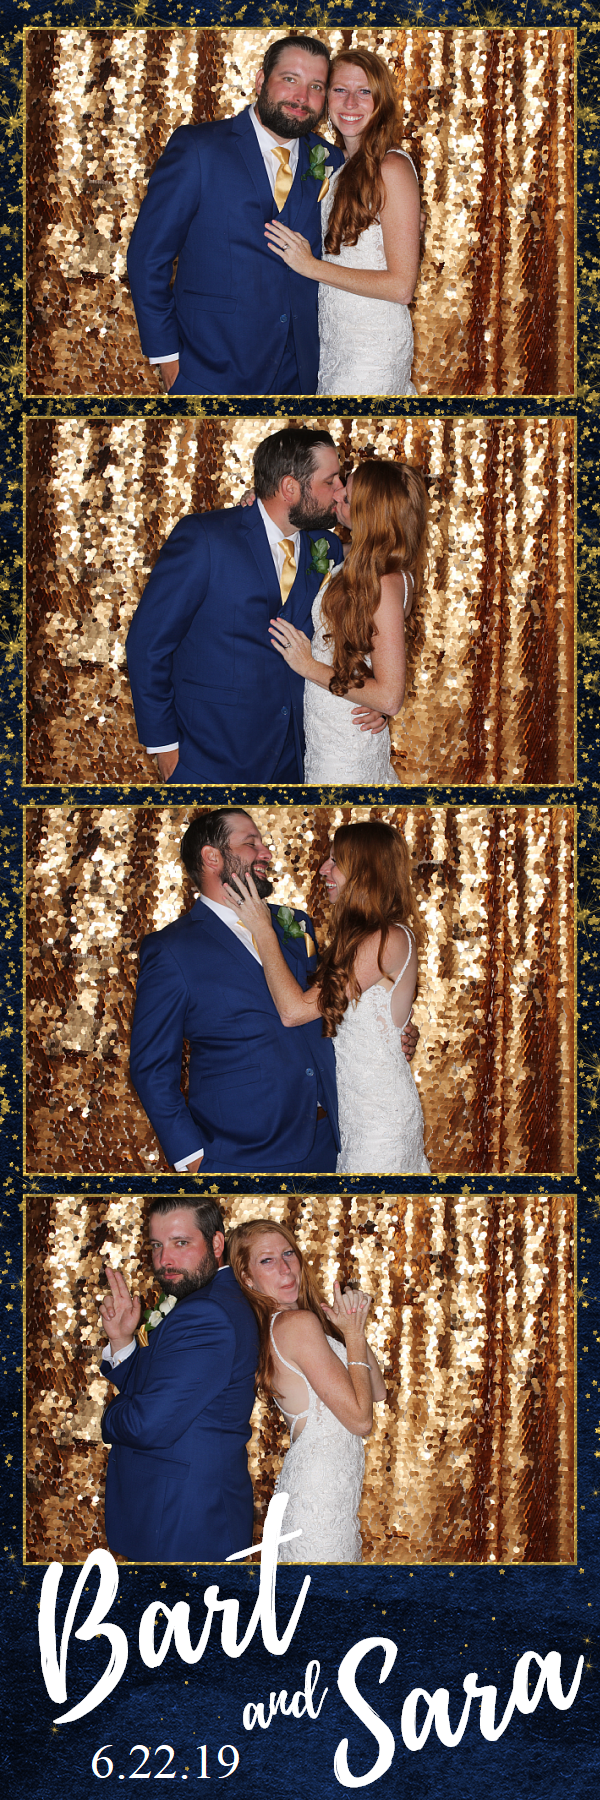 photo strip of bride and groom from photo booth for a wedding reception idea. 